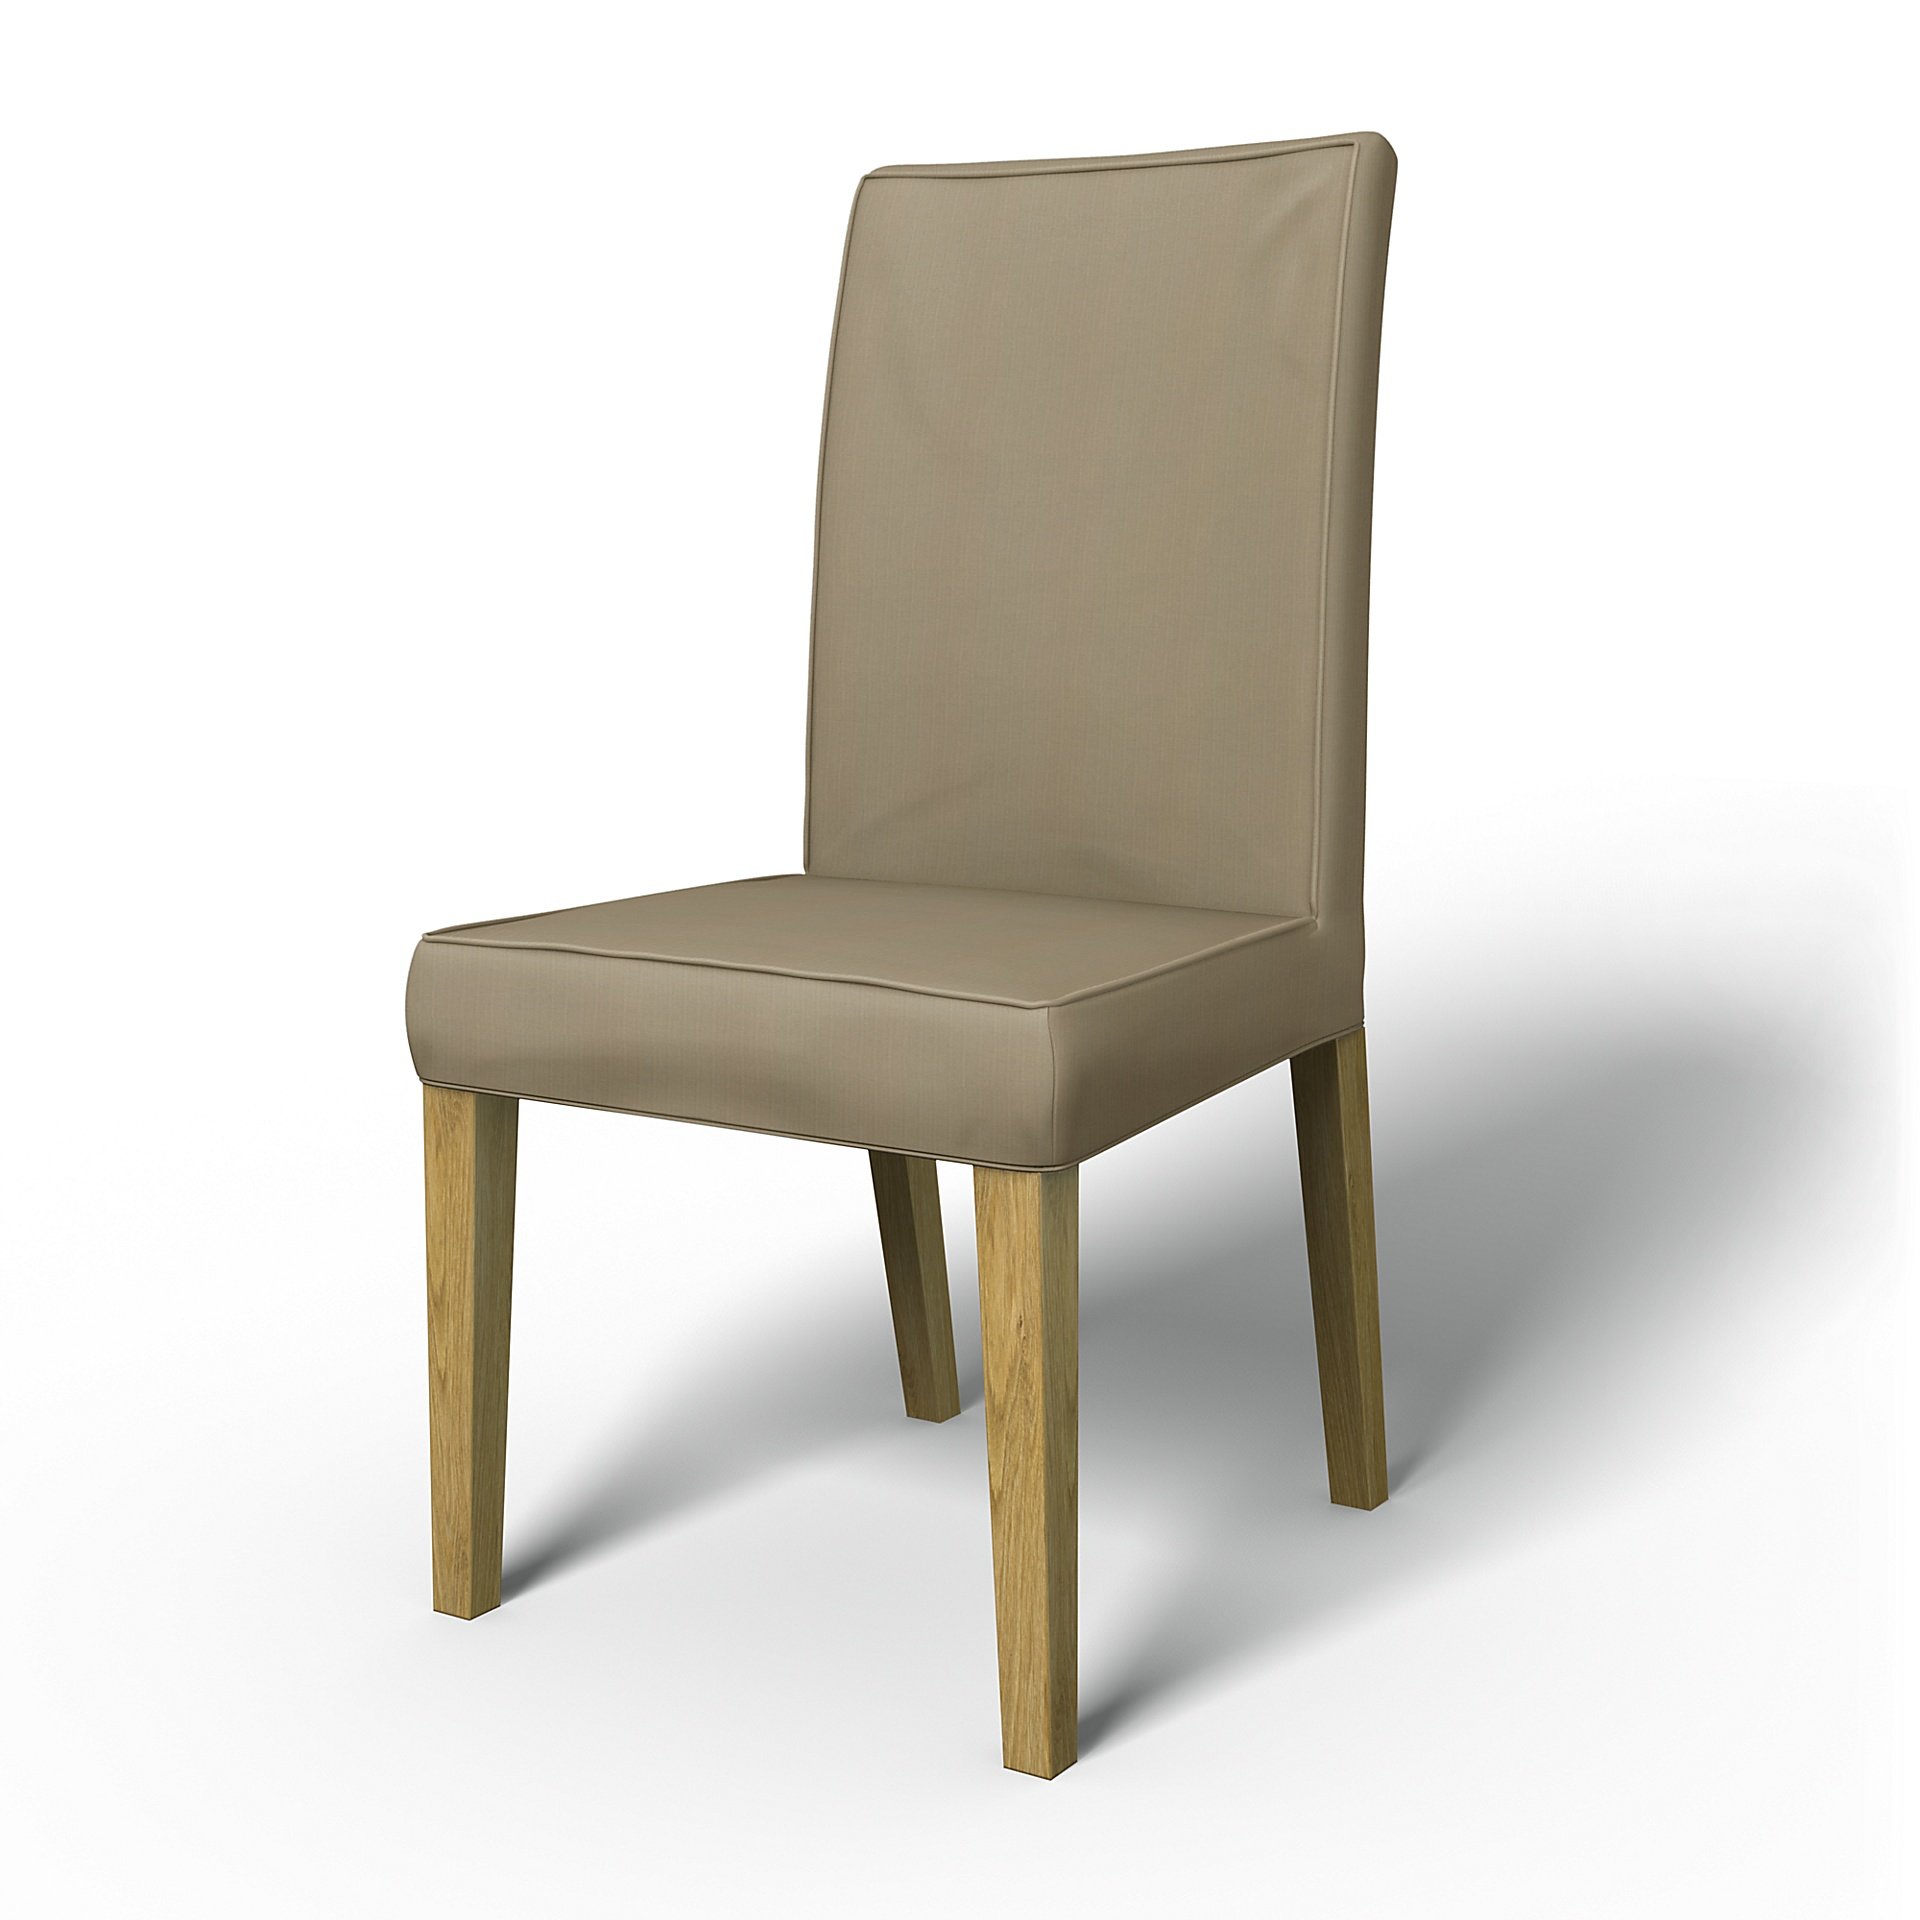 IKEA - Henriksdal Dining Chair Cover with piping (Standard model), Dark Sand, Outdoor - Bemz